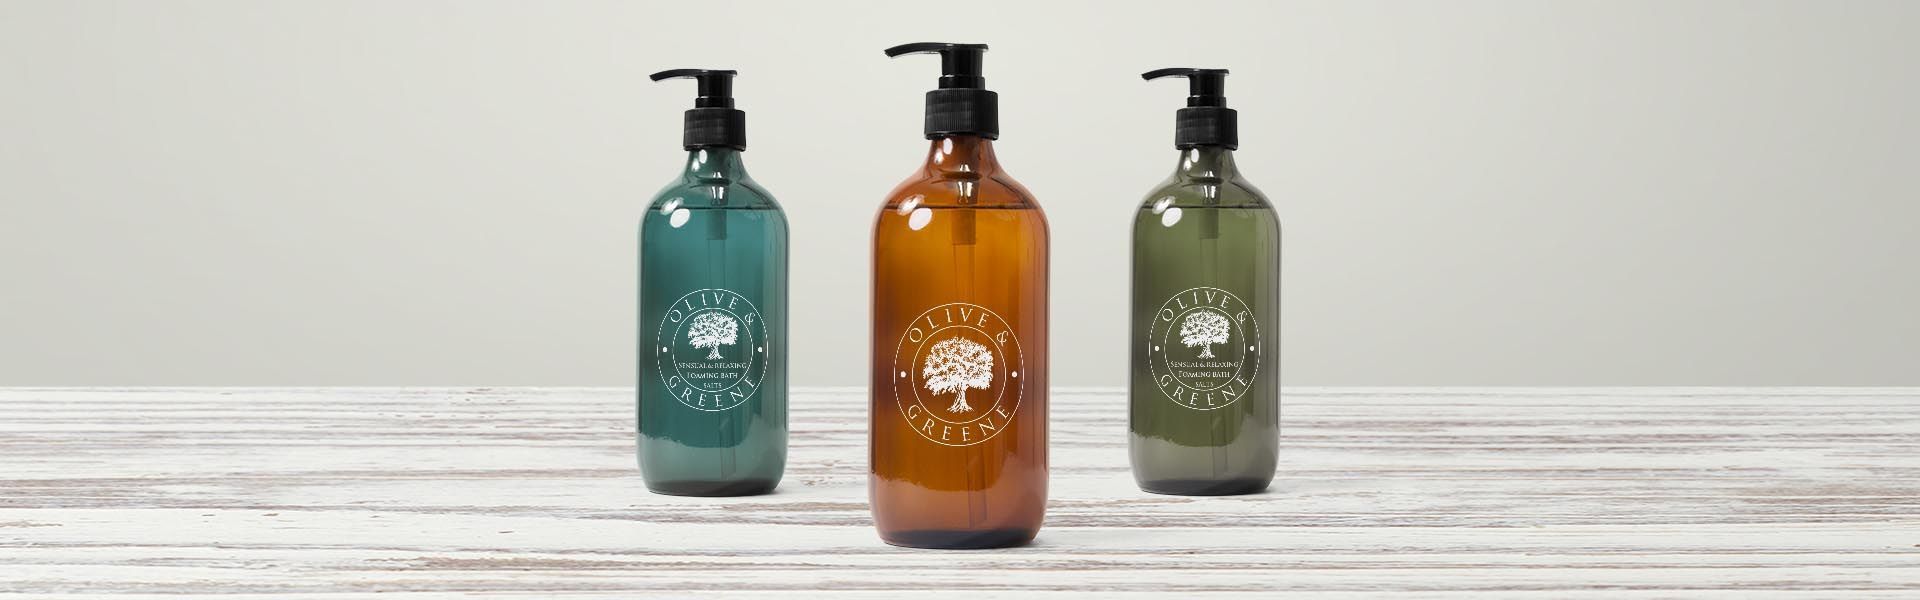 three bottles of olive greene soap sit on a wooden table